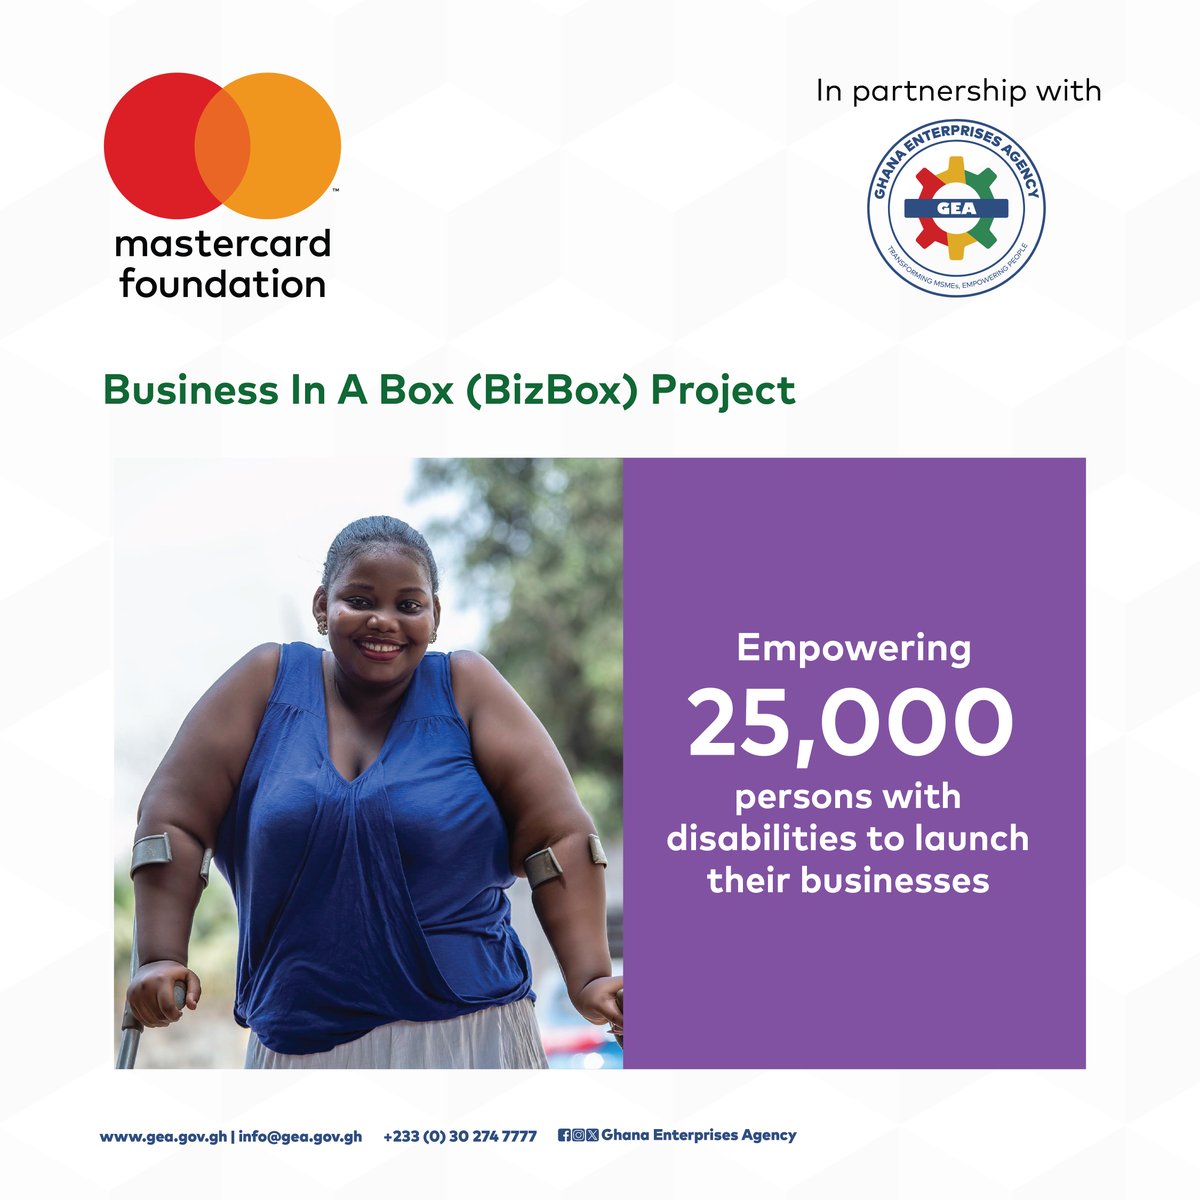 The Business In A Box (BizBox) Project is sparking up hope and empowerment for individuals facing unique challenges due to their disabilities.

Visit any of our BACs or BRCs to find out more about how you can register as a PWD. Or call +233 (0) 30 274 7777 for assistance.